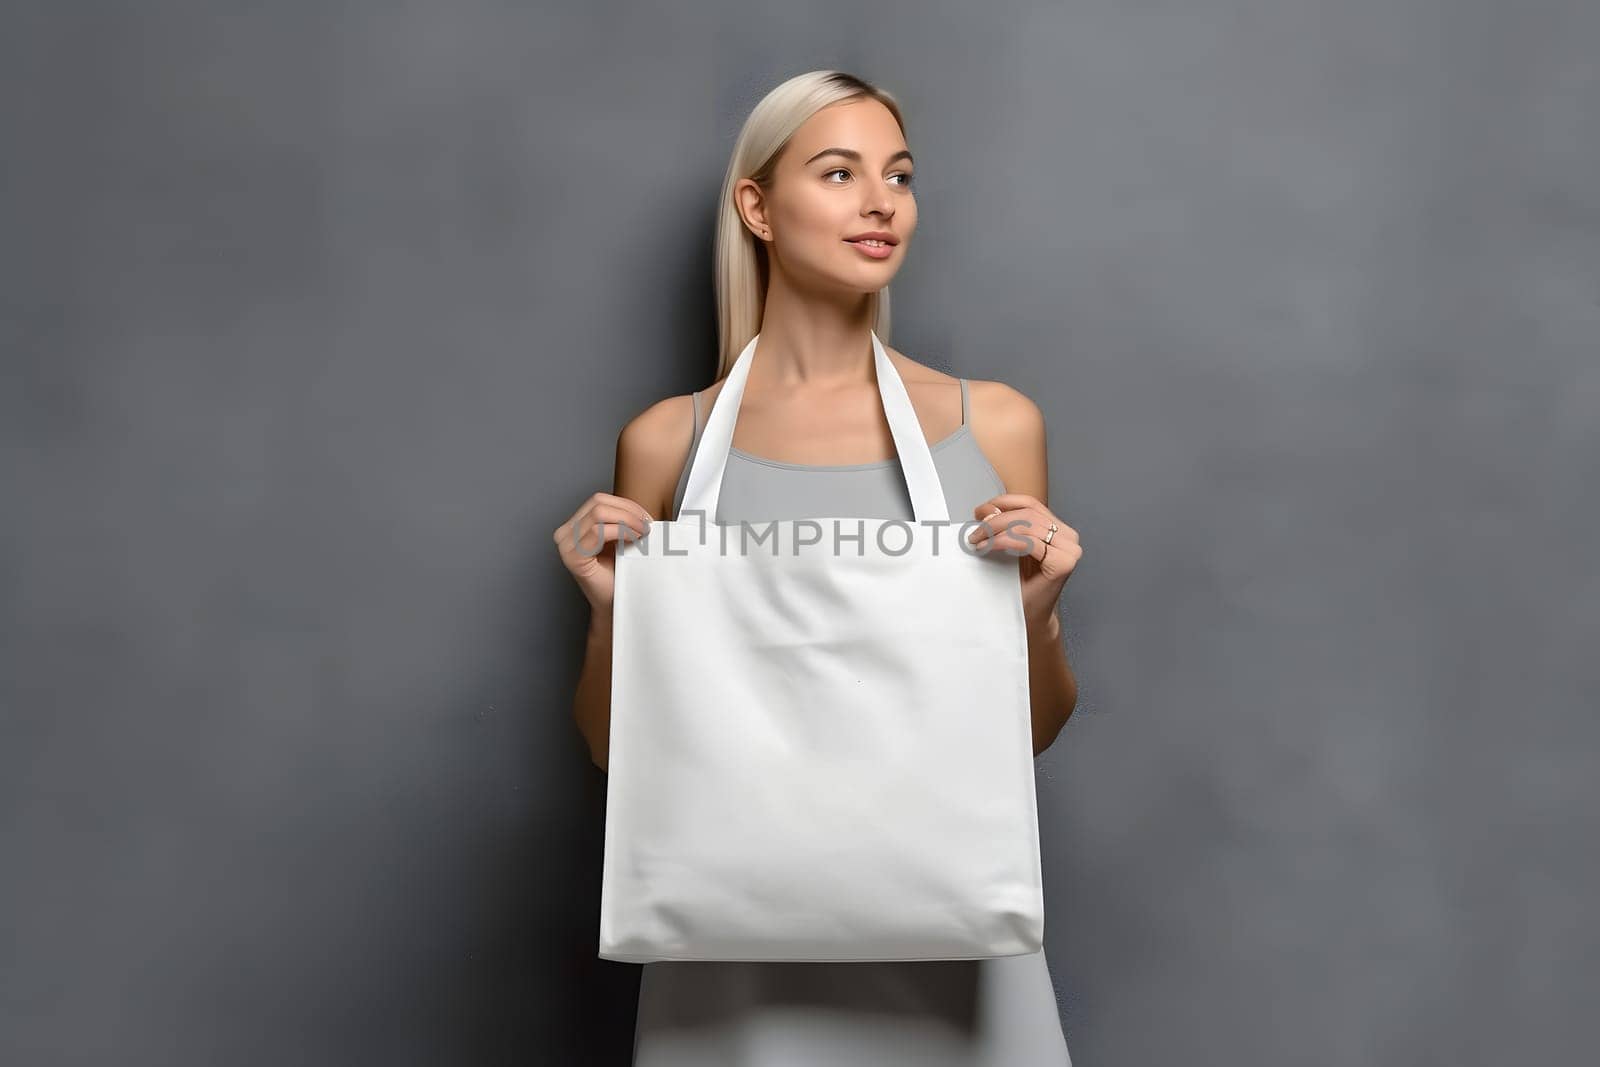 caucasian woman holding blank white tote bag made of canvas fabric with handle on her neck, mock up design, neural network generated photorealistic image by z1b